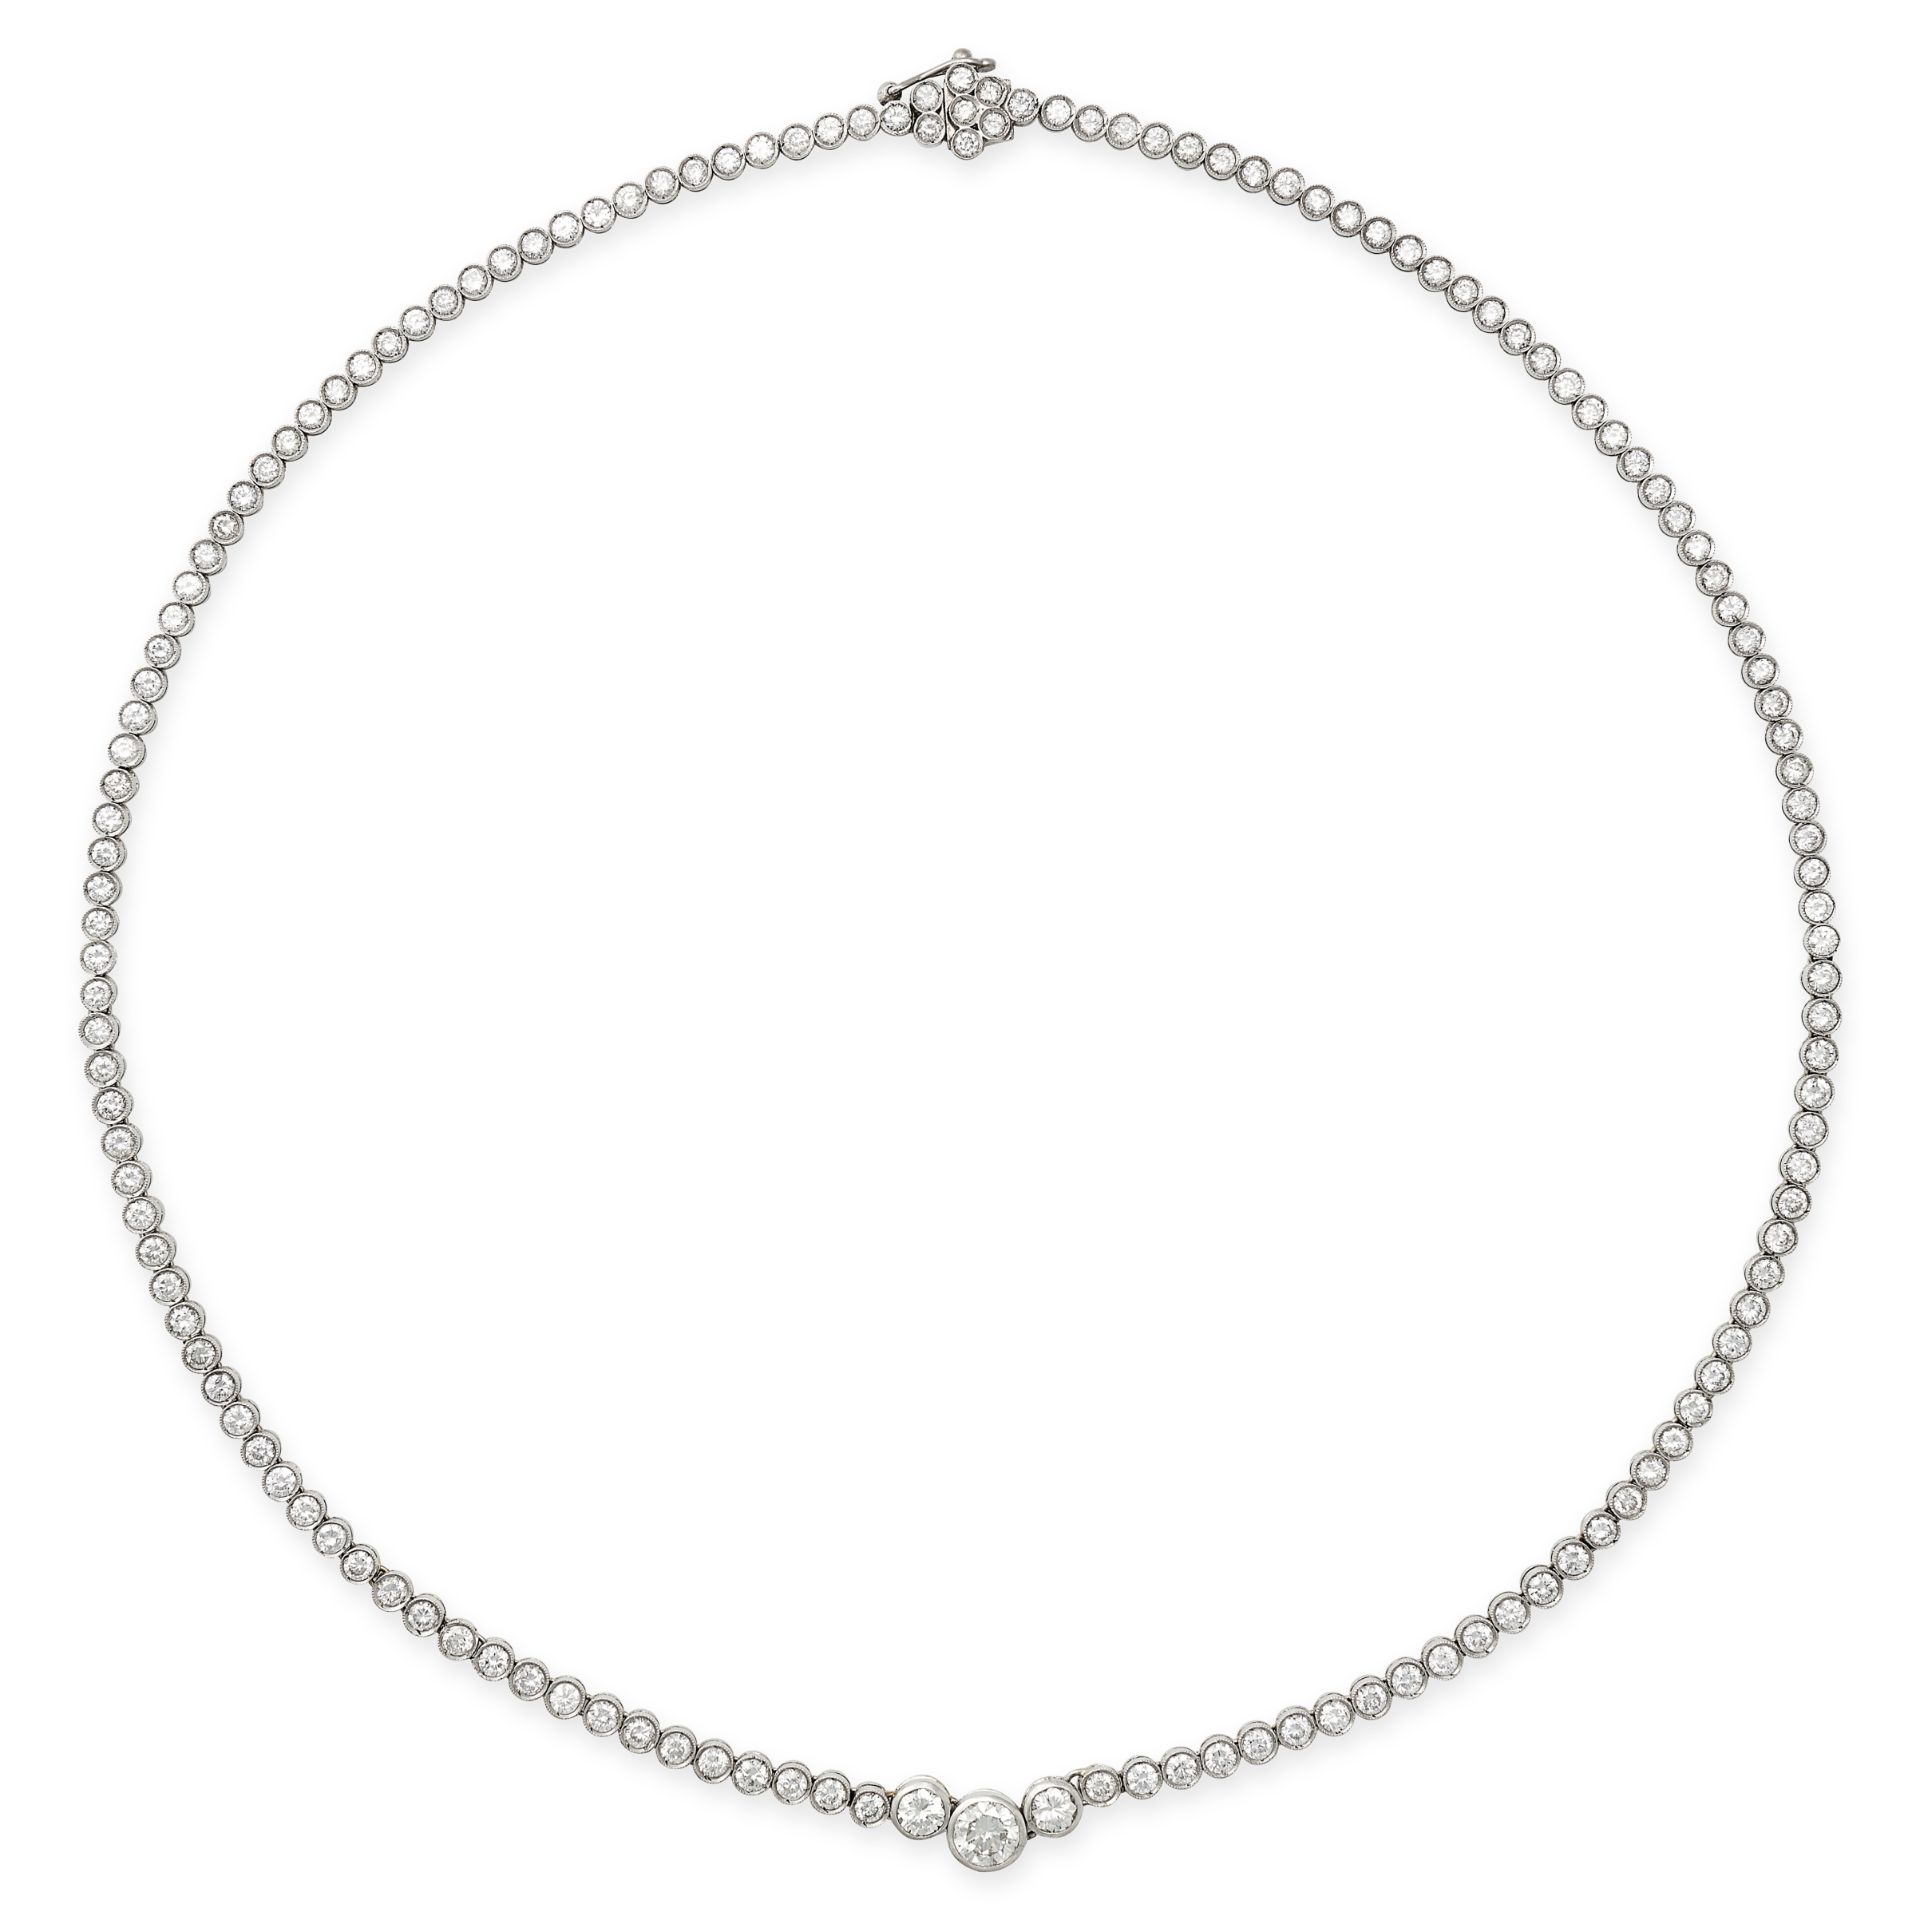 A DIAMOND NECKLACE set with a single row of round brilliant cut diamonds, the diamonds totalling 9.